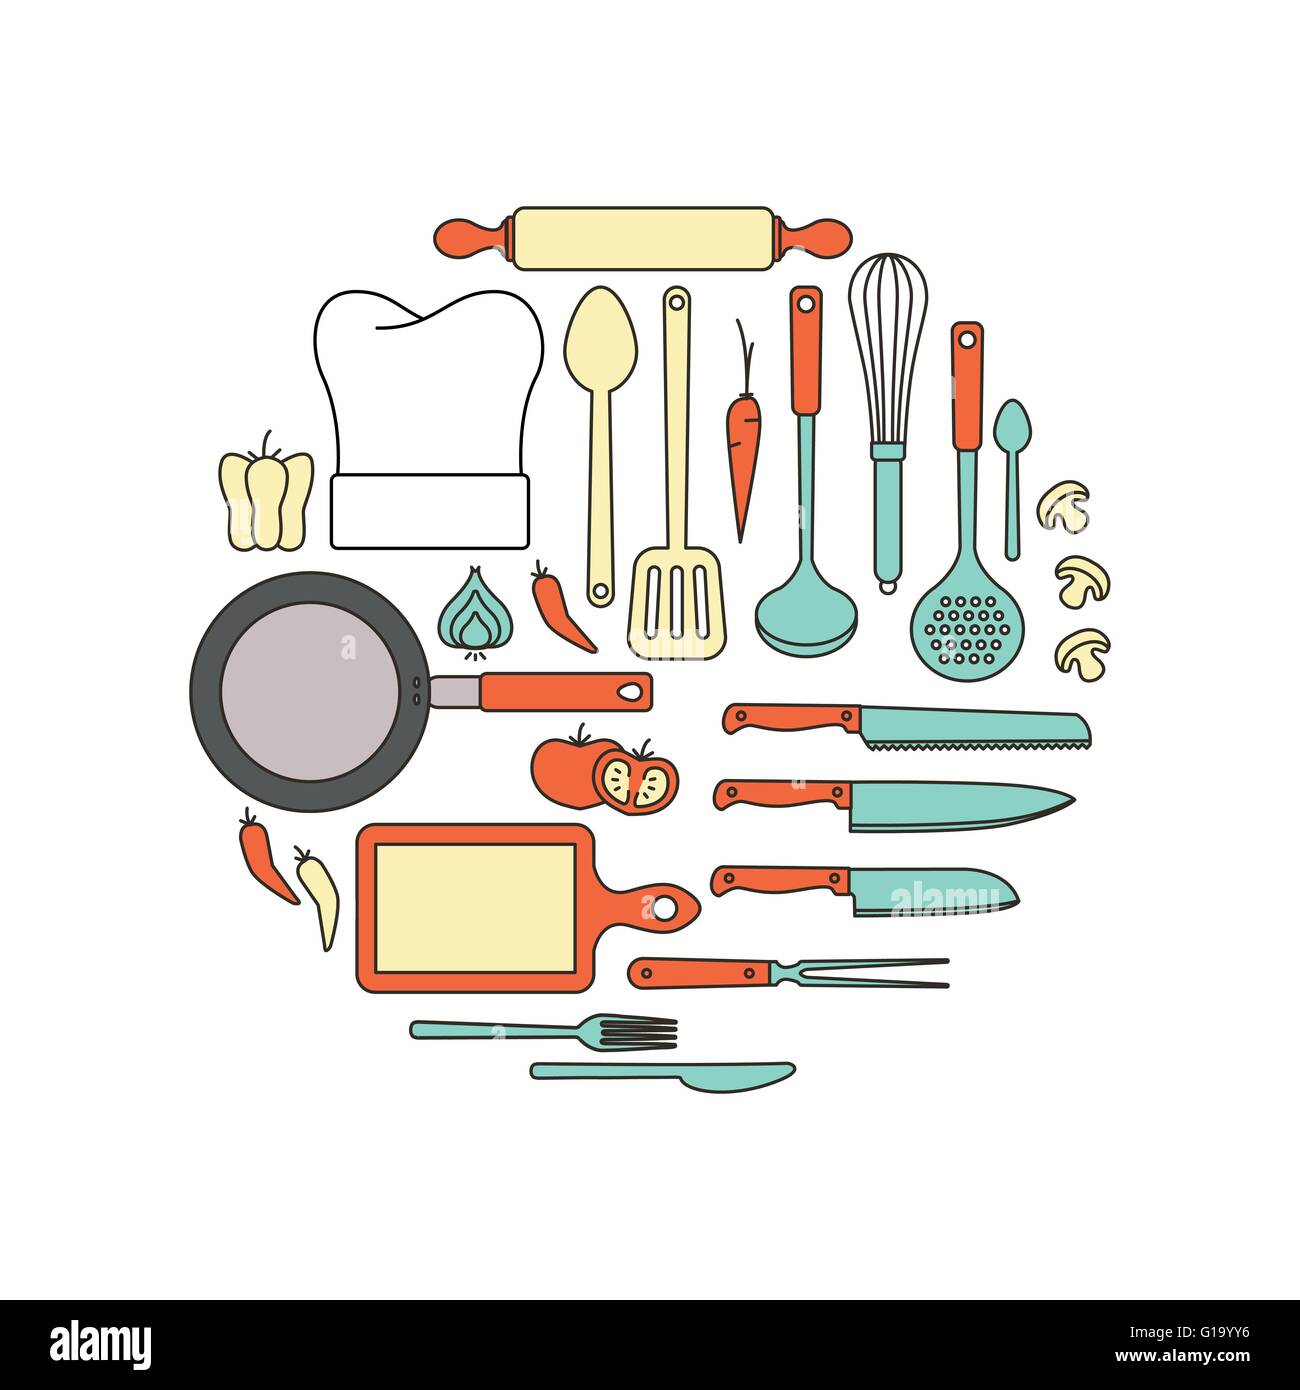 Kitchen and cooking equipment, thin line objects in a  circular shape on white background Stock Vector